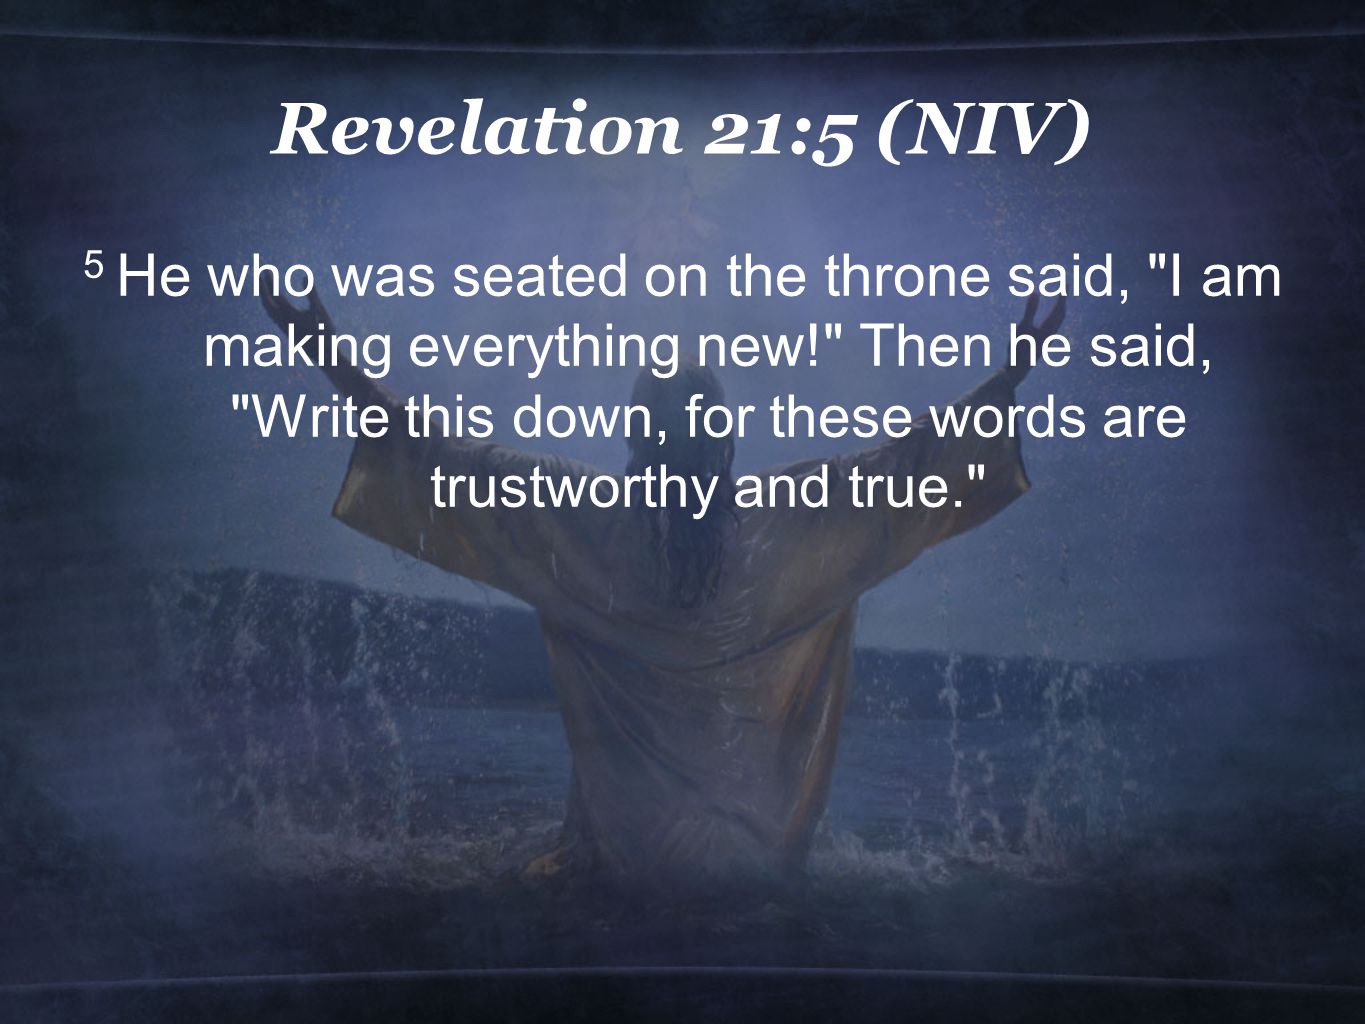 Revelation 21:5 (NIV) 5 He who was seated on the throne said, I am making everything new! Then he said, Write this down, for these words are trustworthy and true.